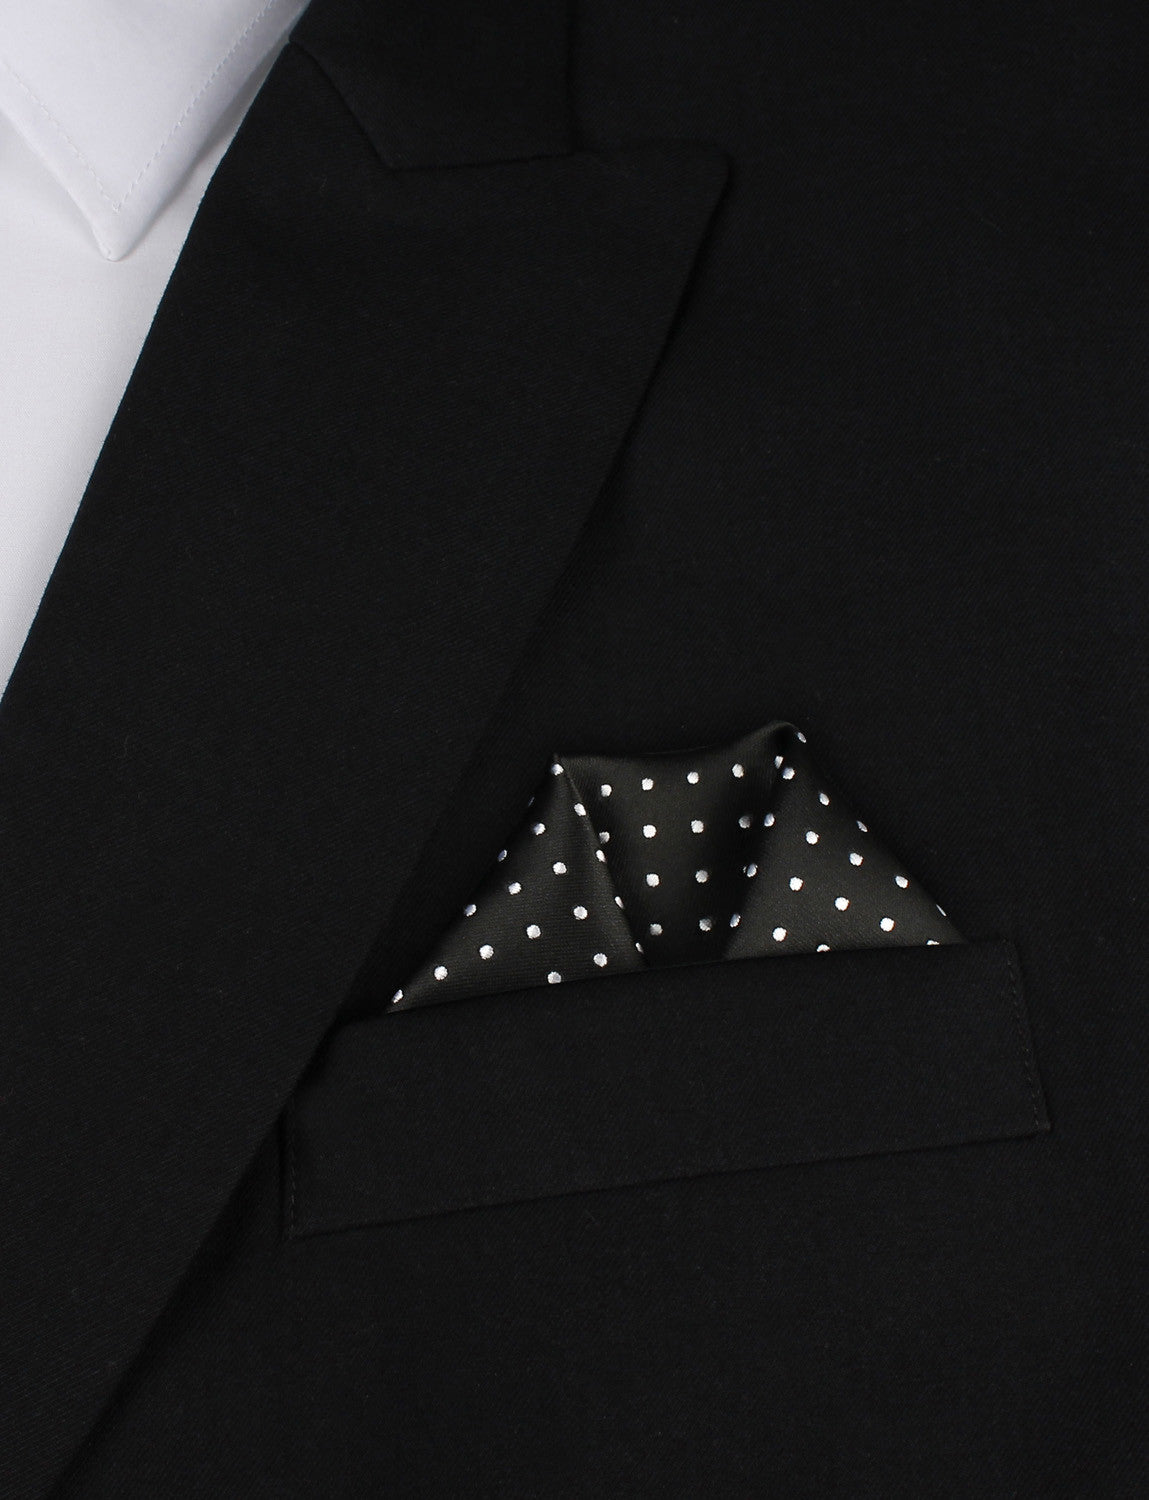 Black with Small White Polka Dots - Winged Puff Pocket Square Fold